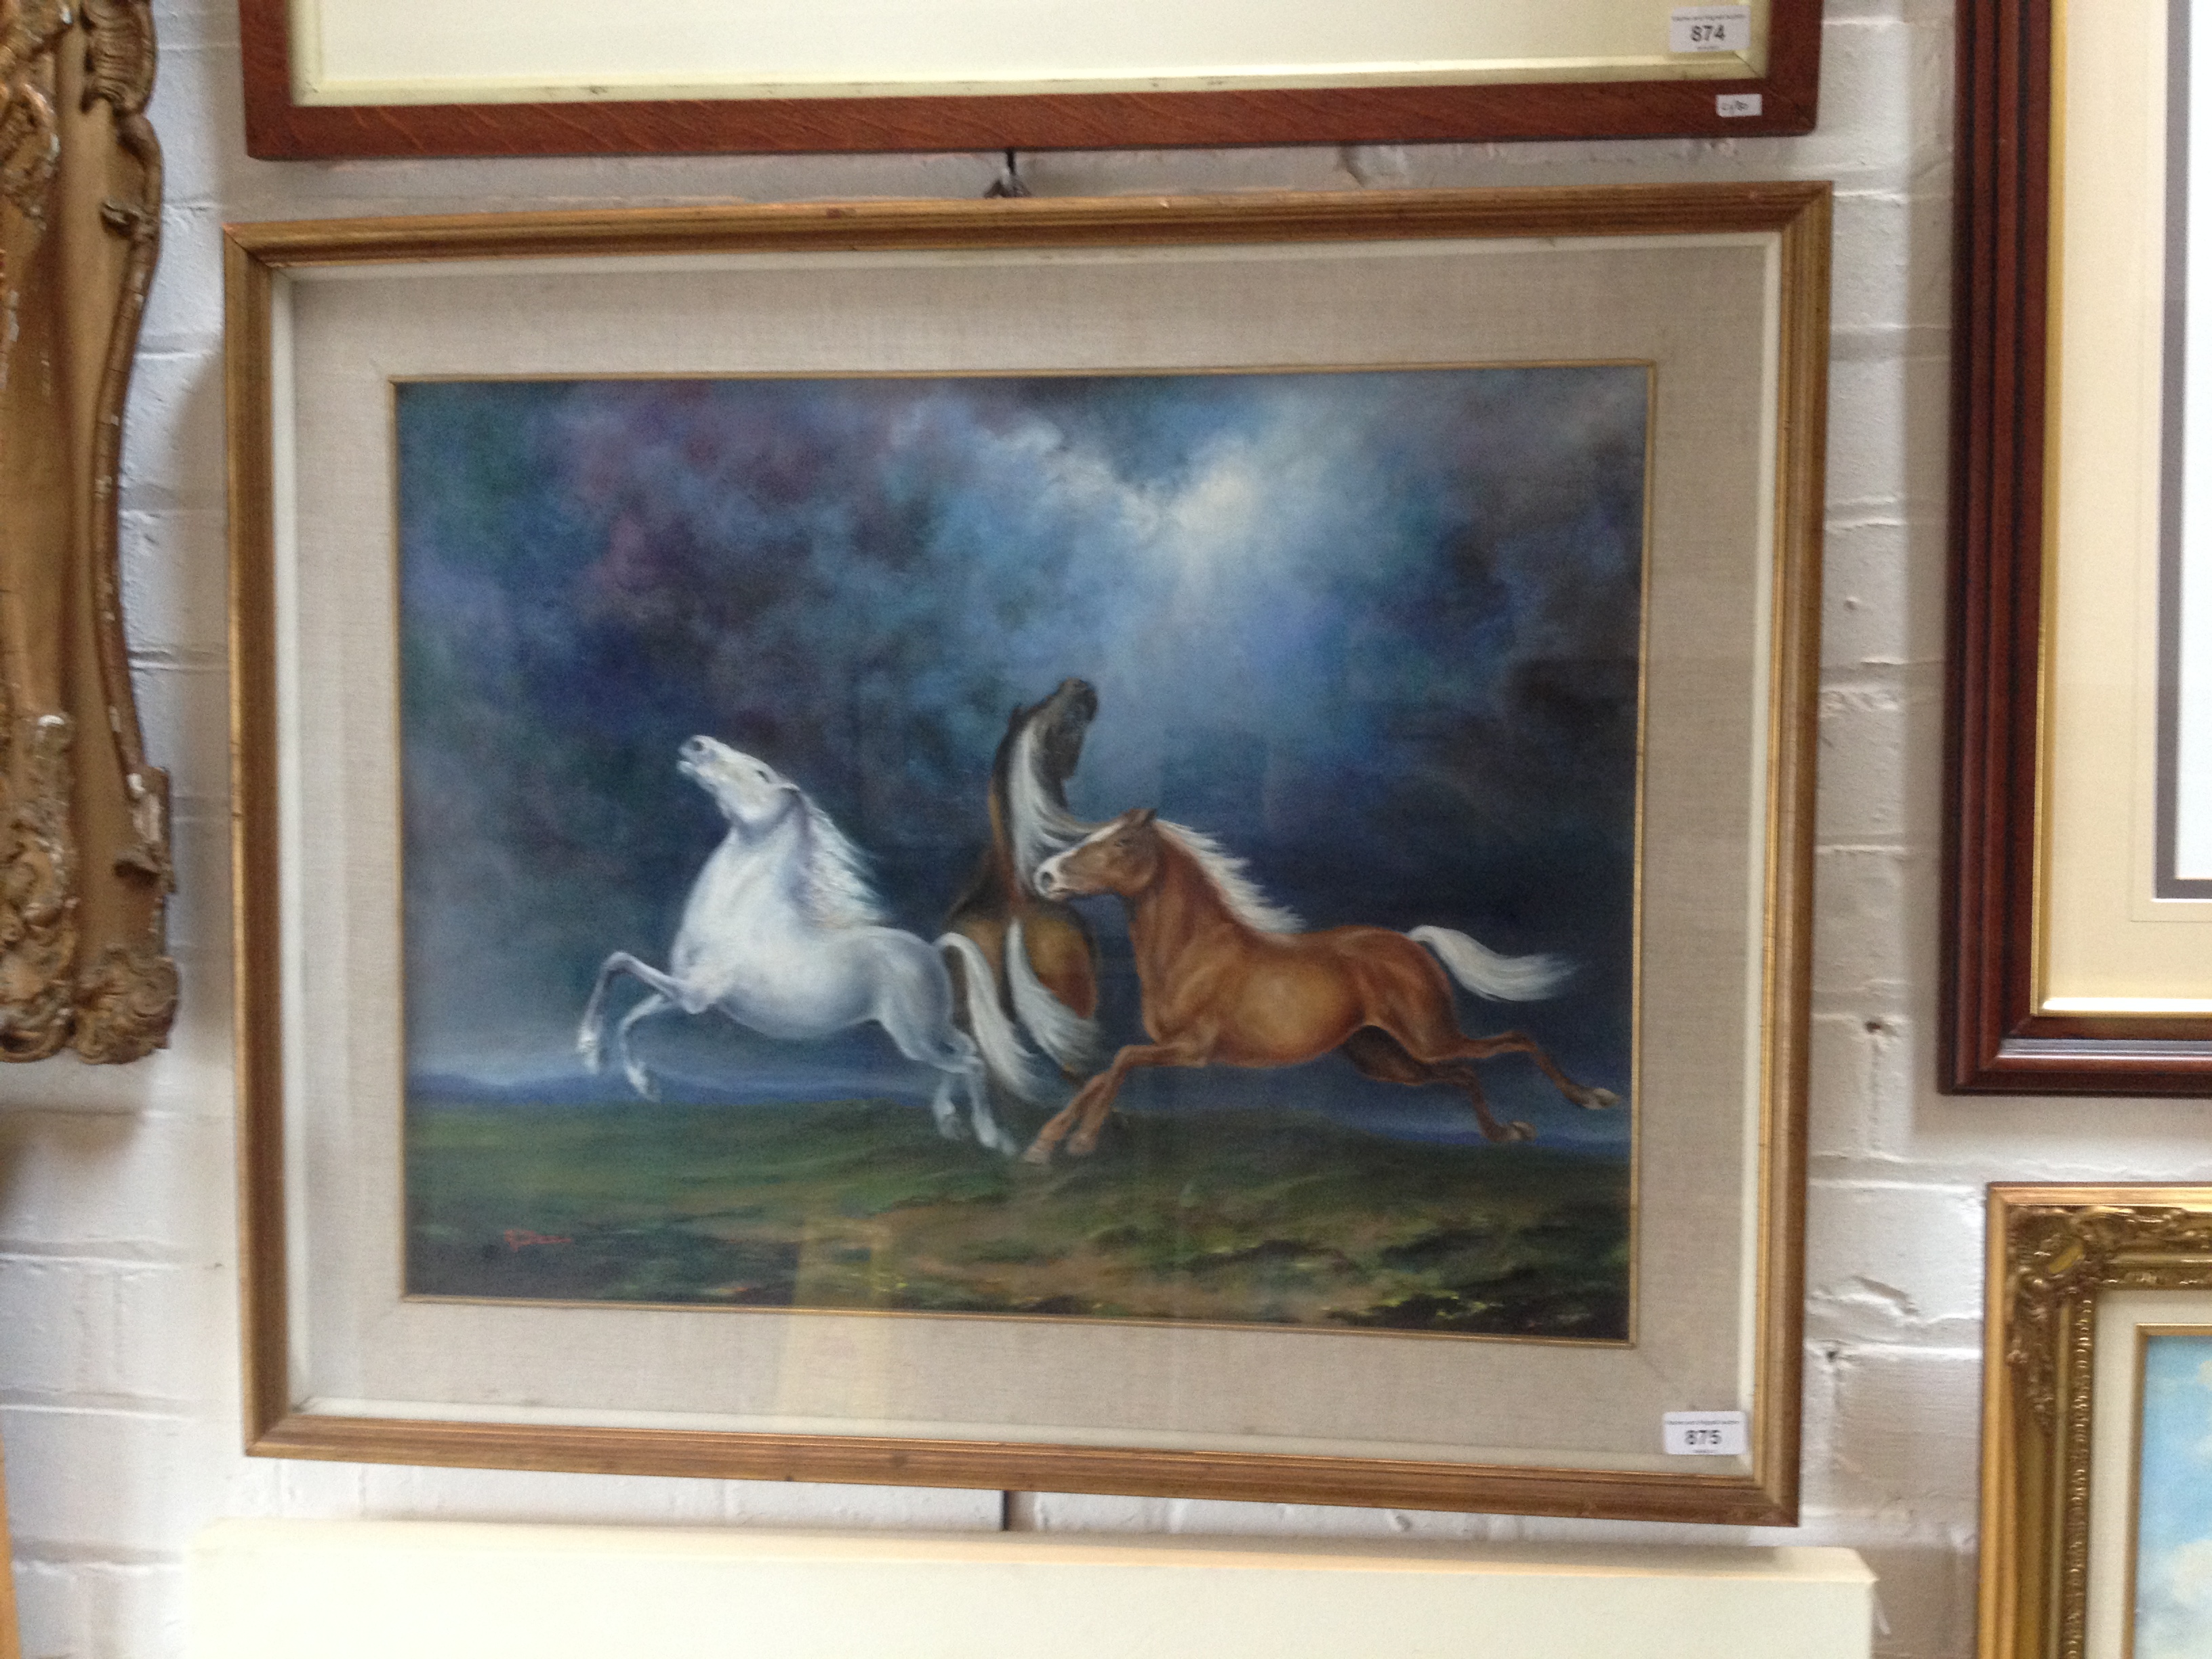 20th century school, oil on canvas, horses, 63cm x 47cm, signed 'A Dexl ' to lower left, framed